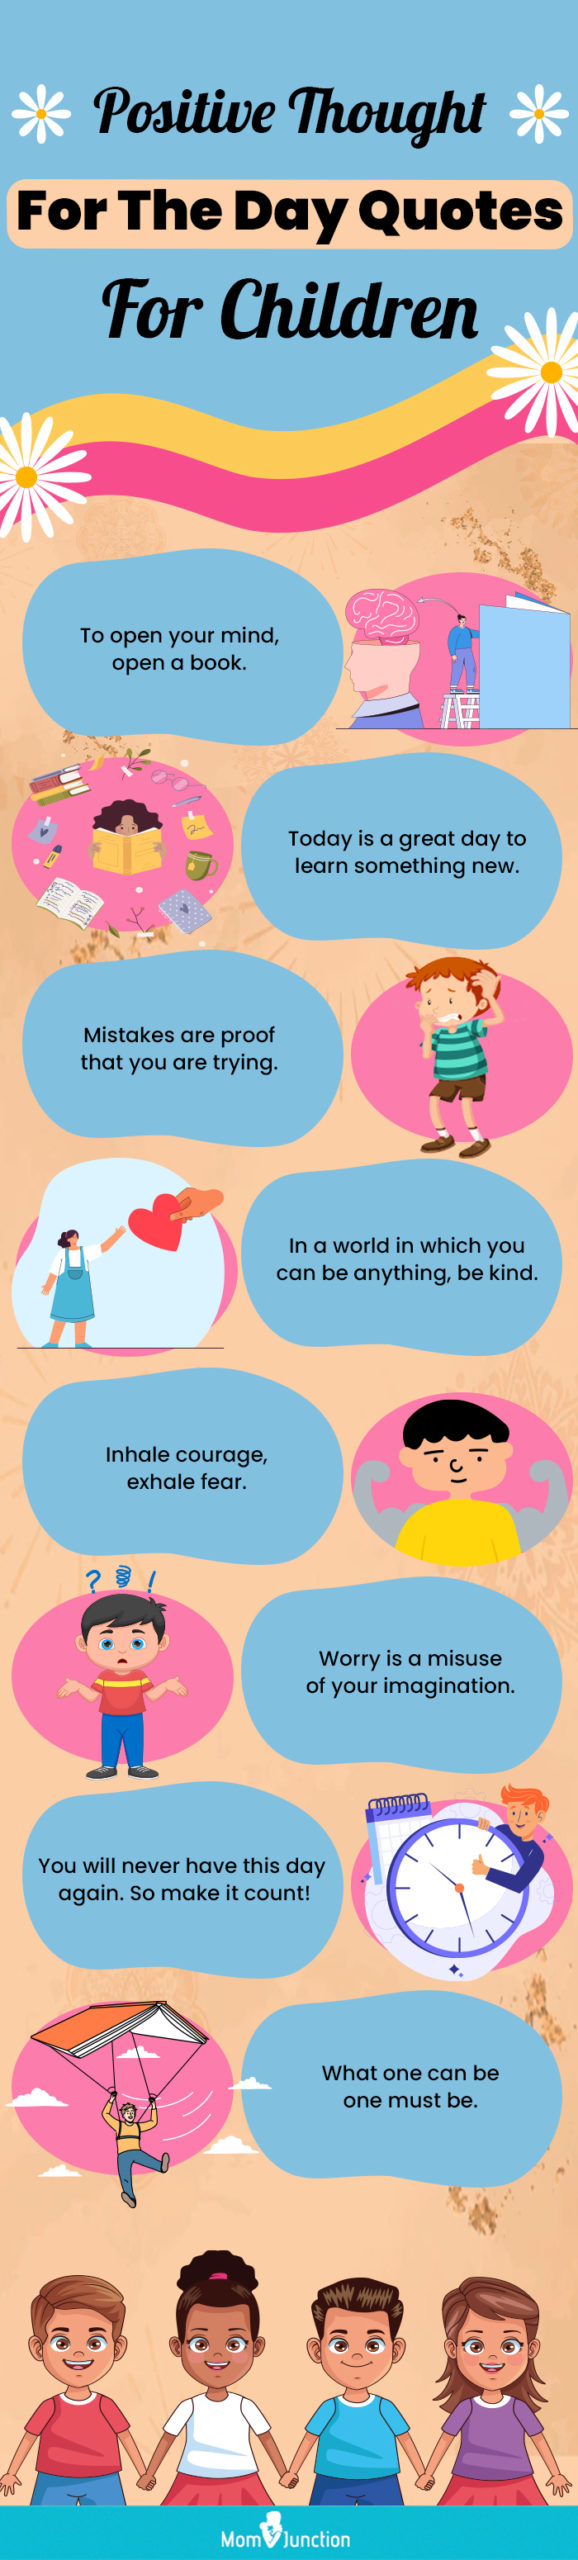 positive thought for the day quotes for kids [infographic]